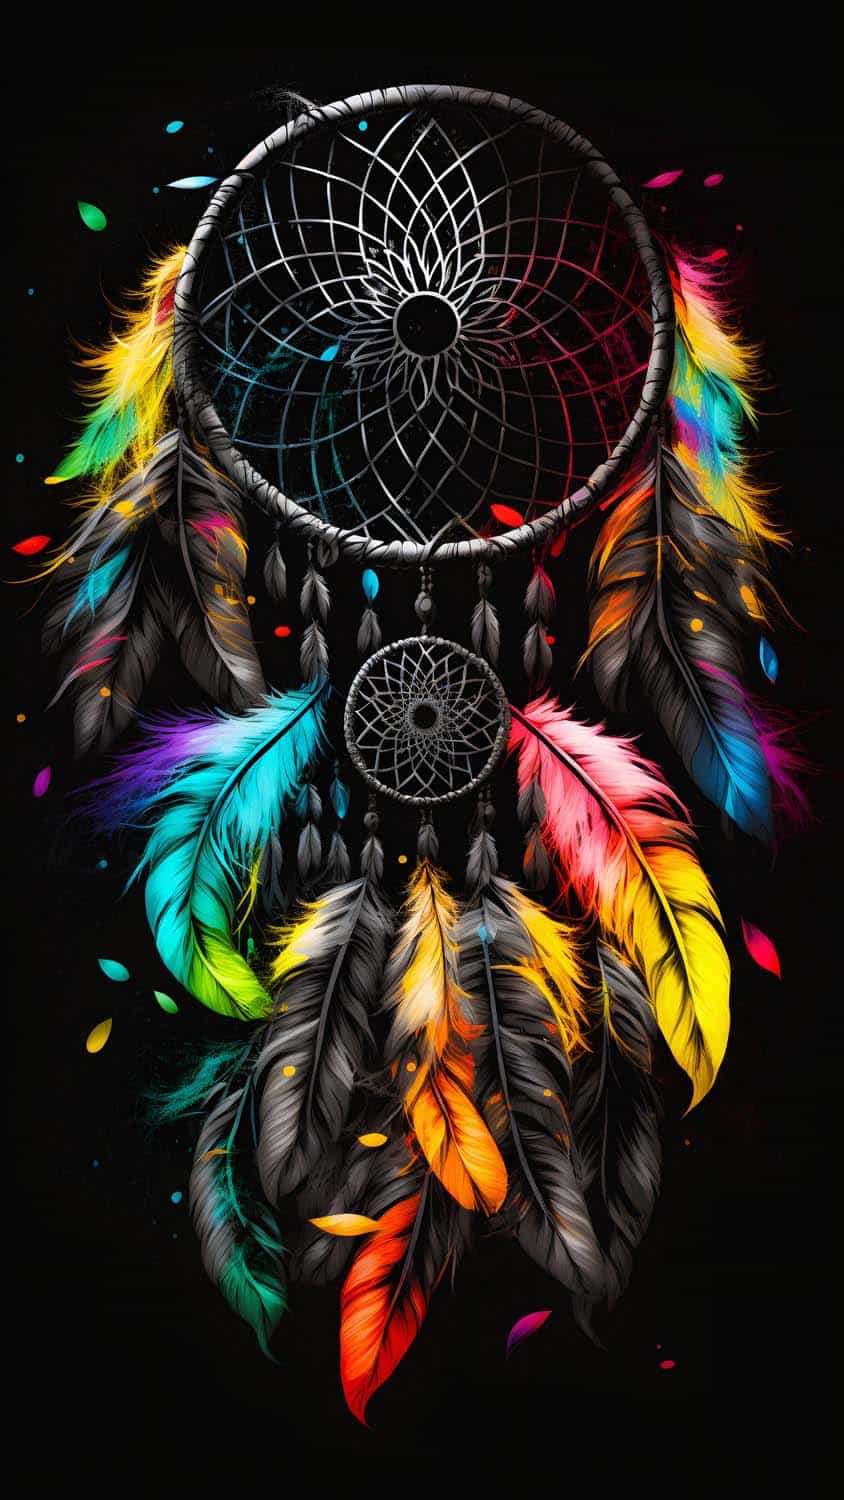 Download Dreamcatcher wallpapers for mobile phone free Dreamcatcher HD  pictures